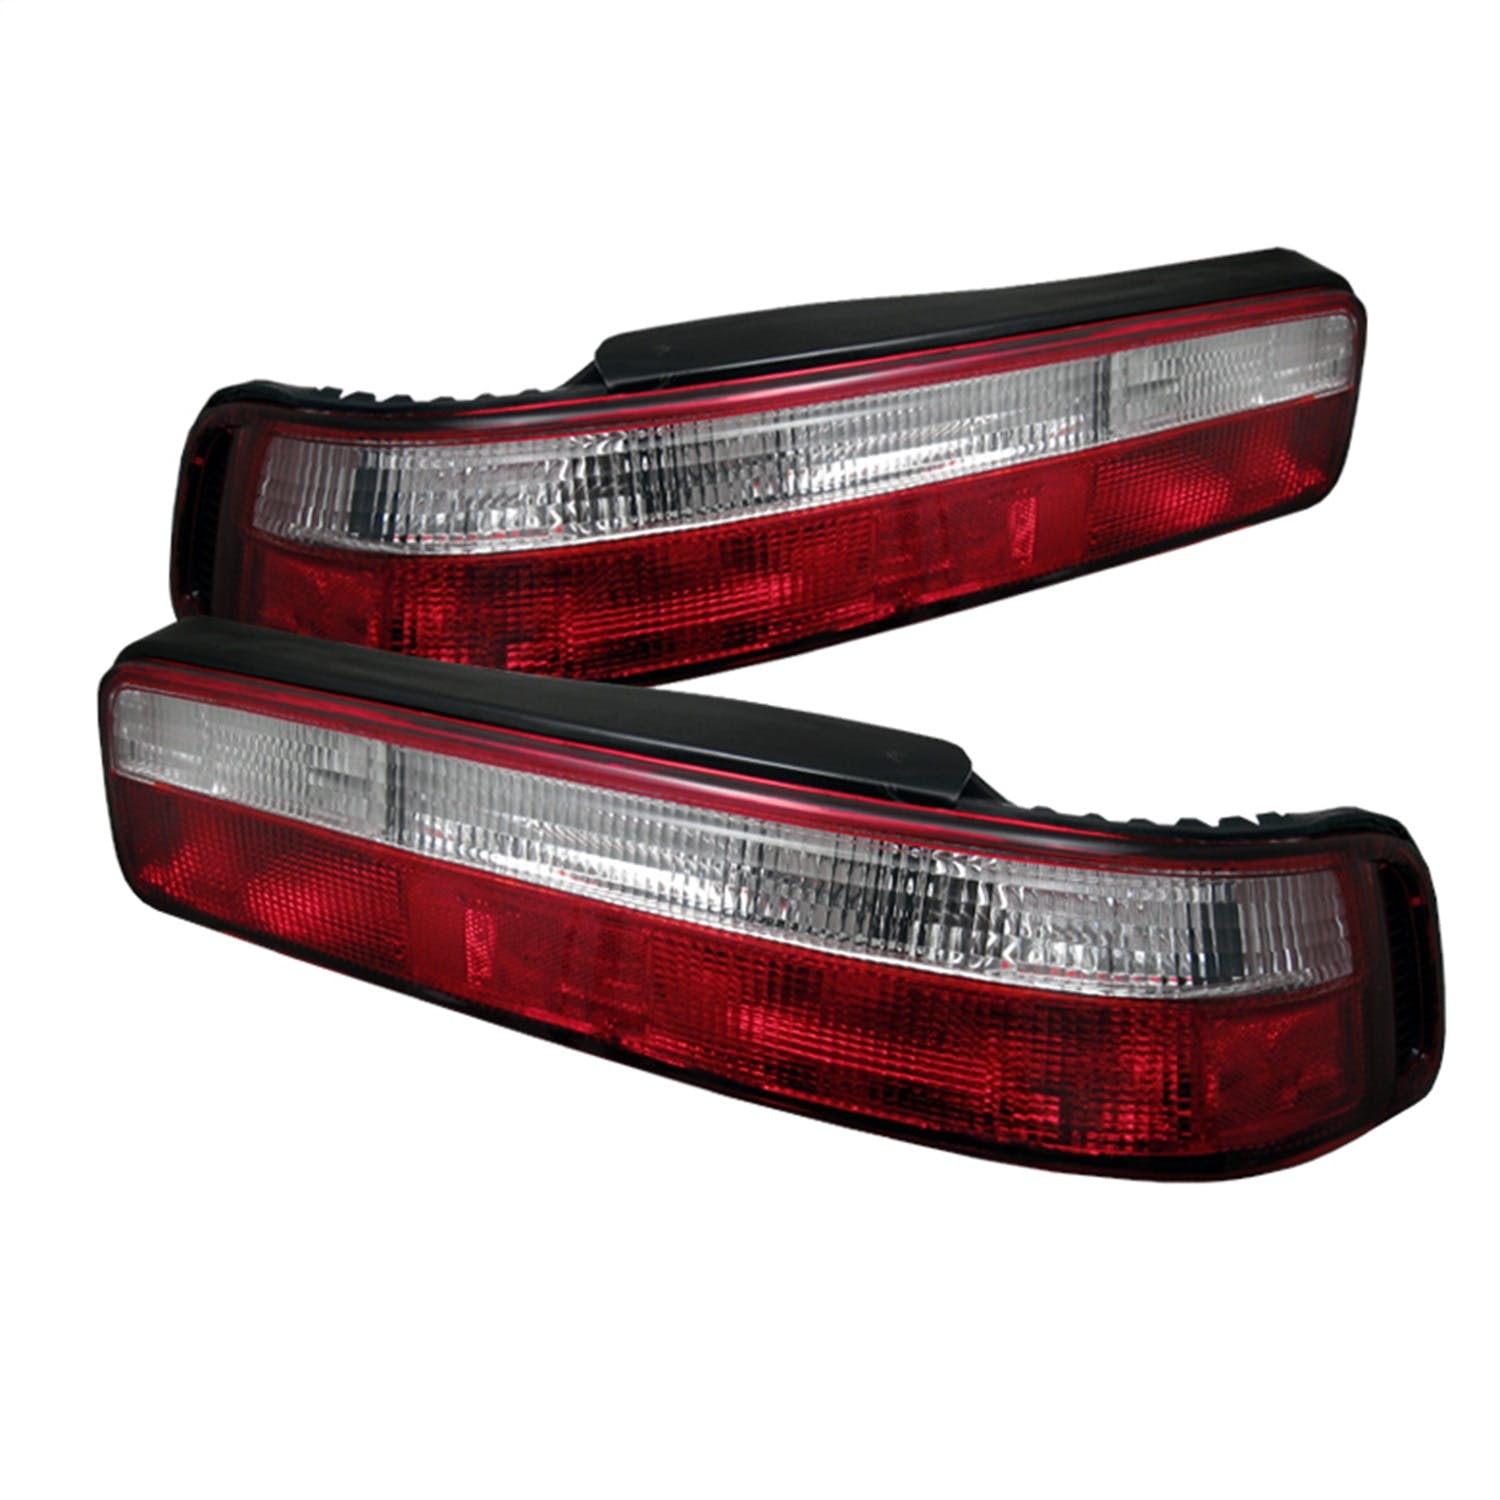 Spyder Auto 5000187 (Spyder) Acura Integra 90-93 2Dr Euro Style Tail Lights-Red Clear